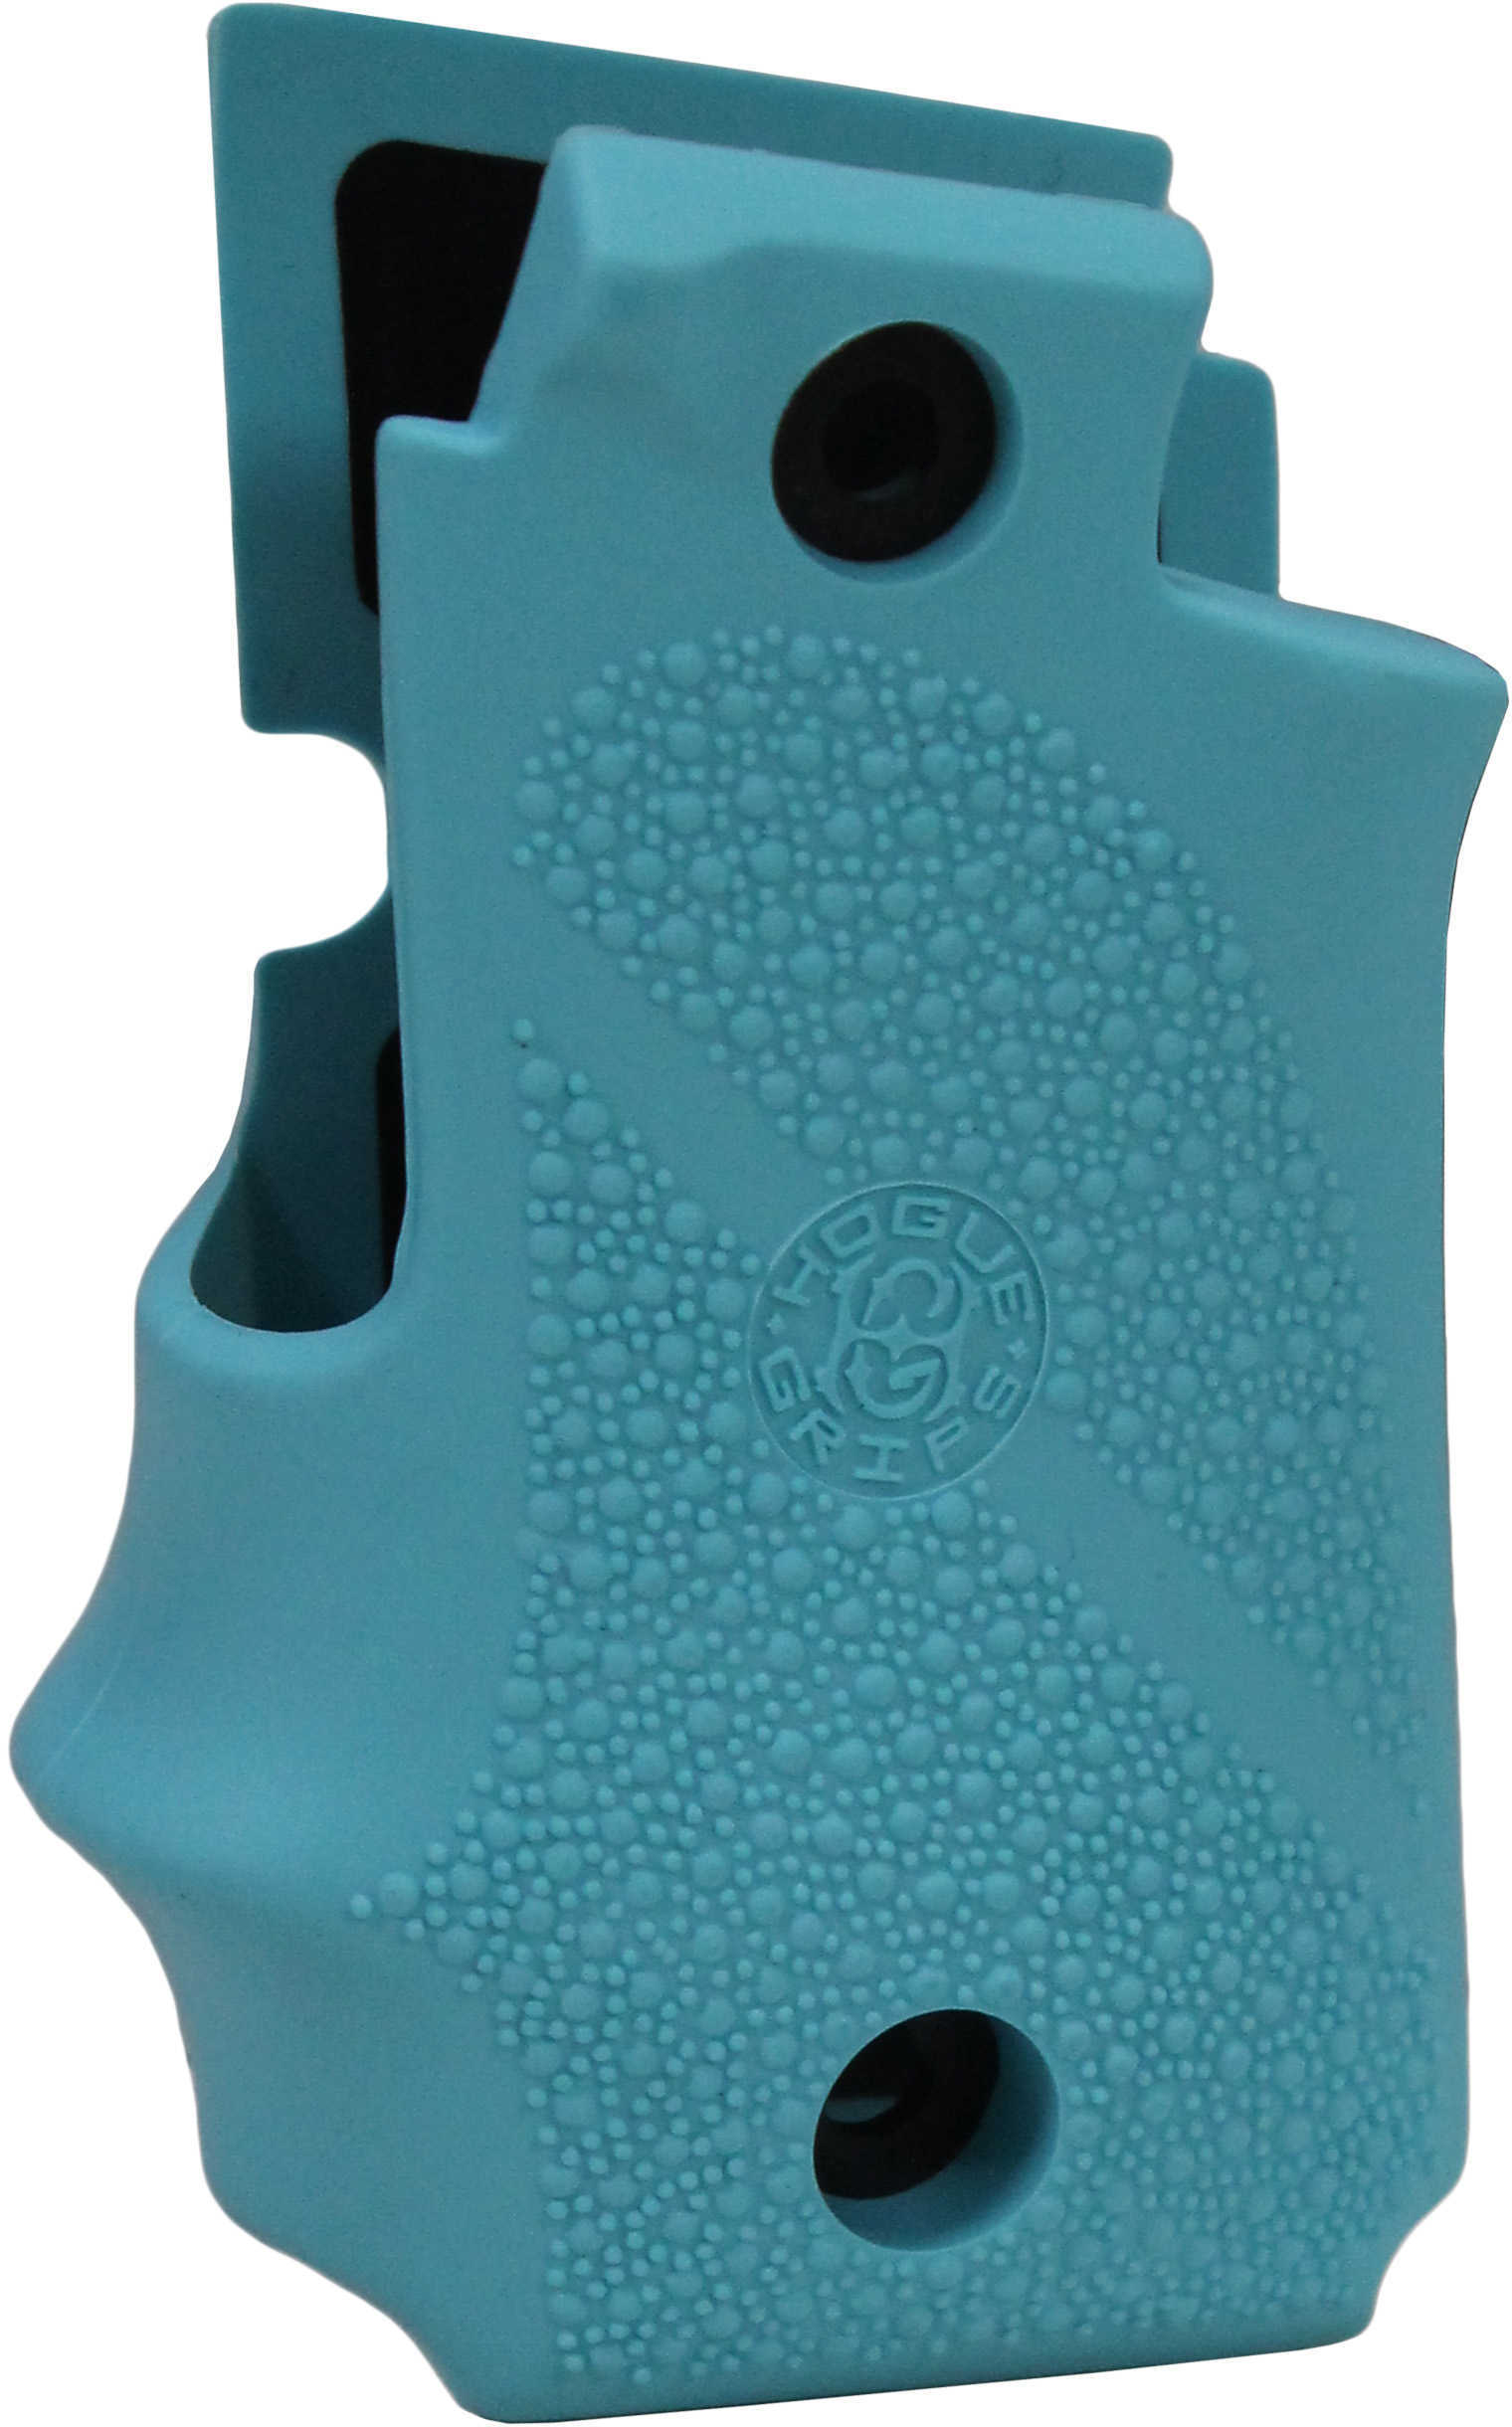 Hogue Sig P238 Grips with Finger Grooves, Aqua Md: 38004